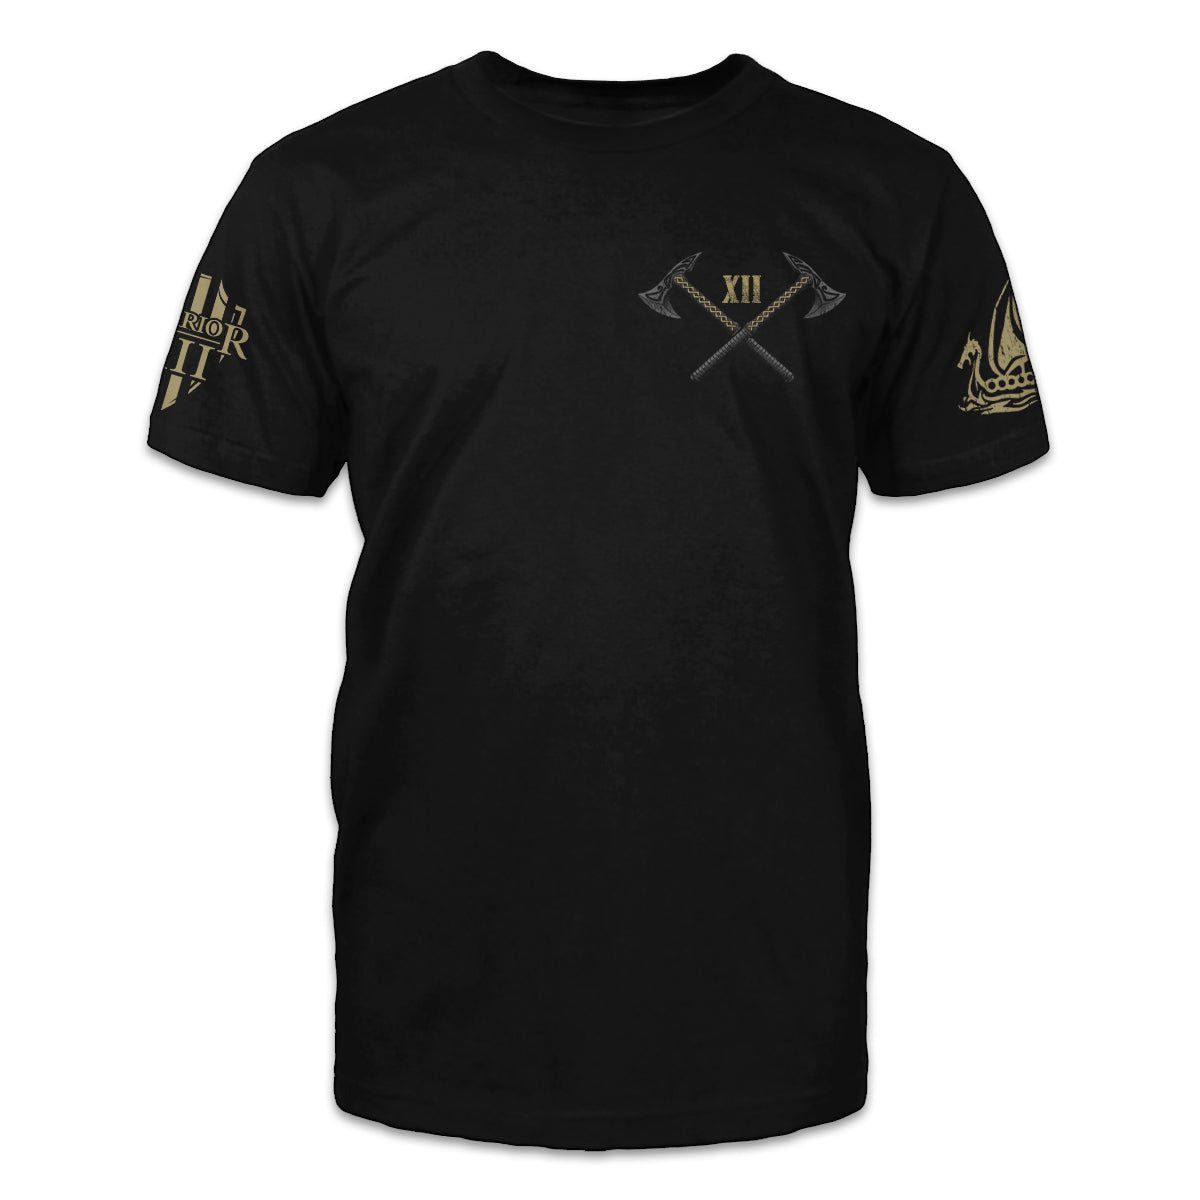 A black t-shirt with two aces crossed with the the roman numerals XII printed on the front of the shirt.